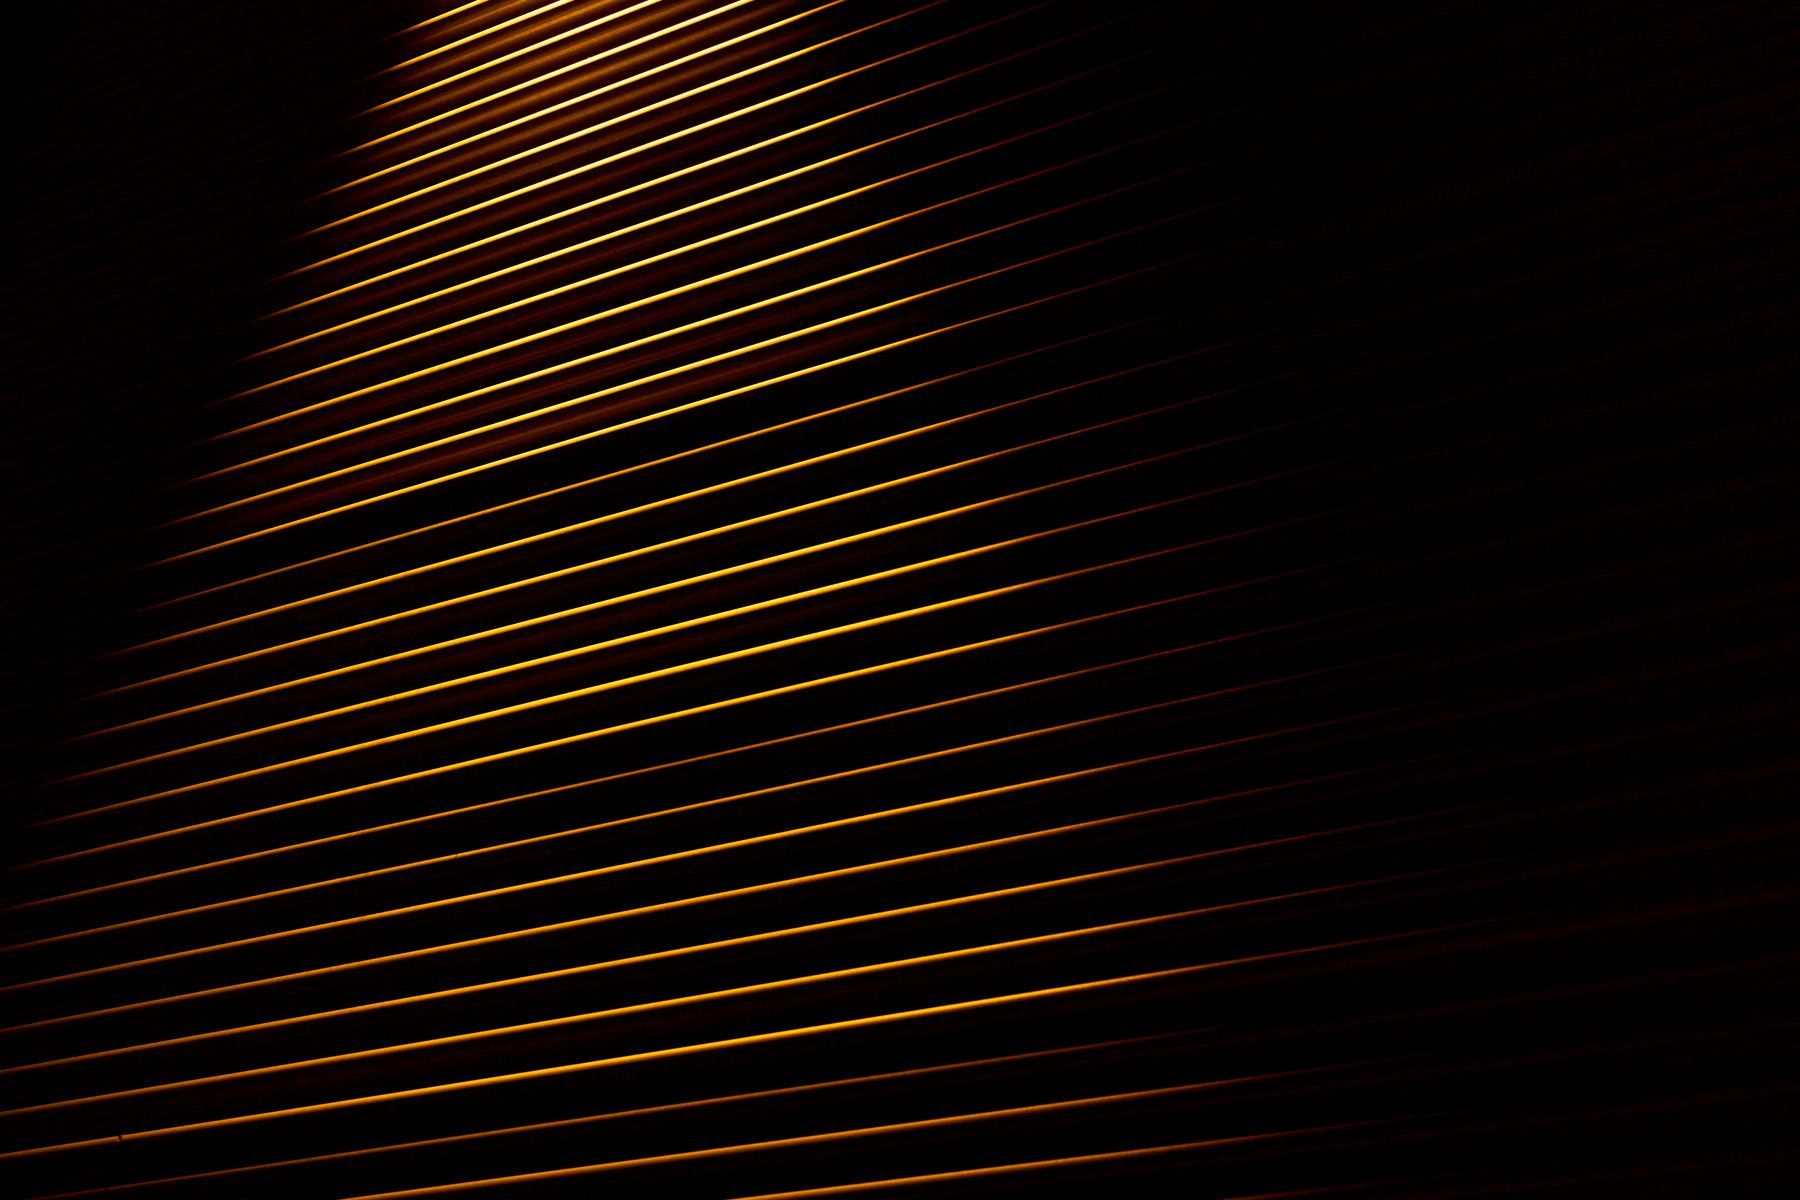 Pure abstraction of light washing the side of a metal clad building.